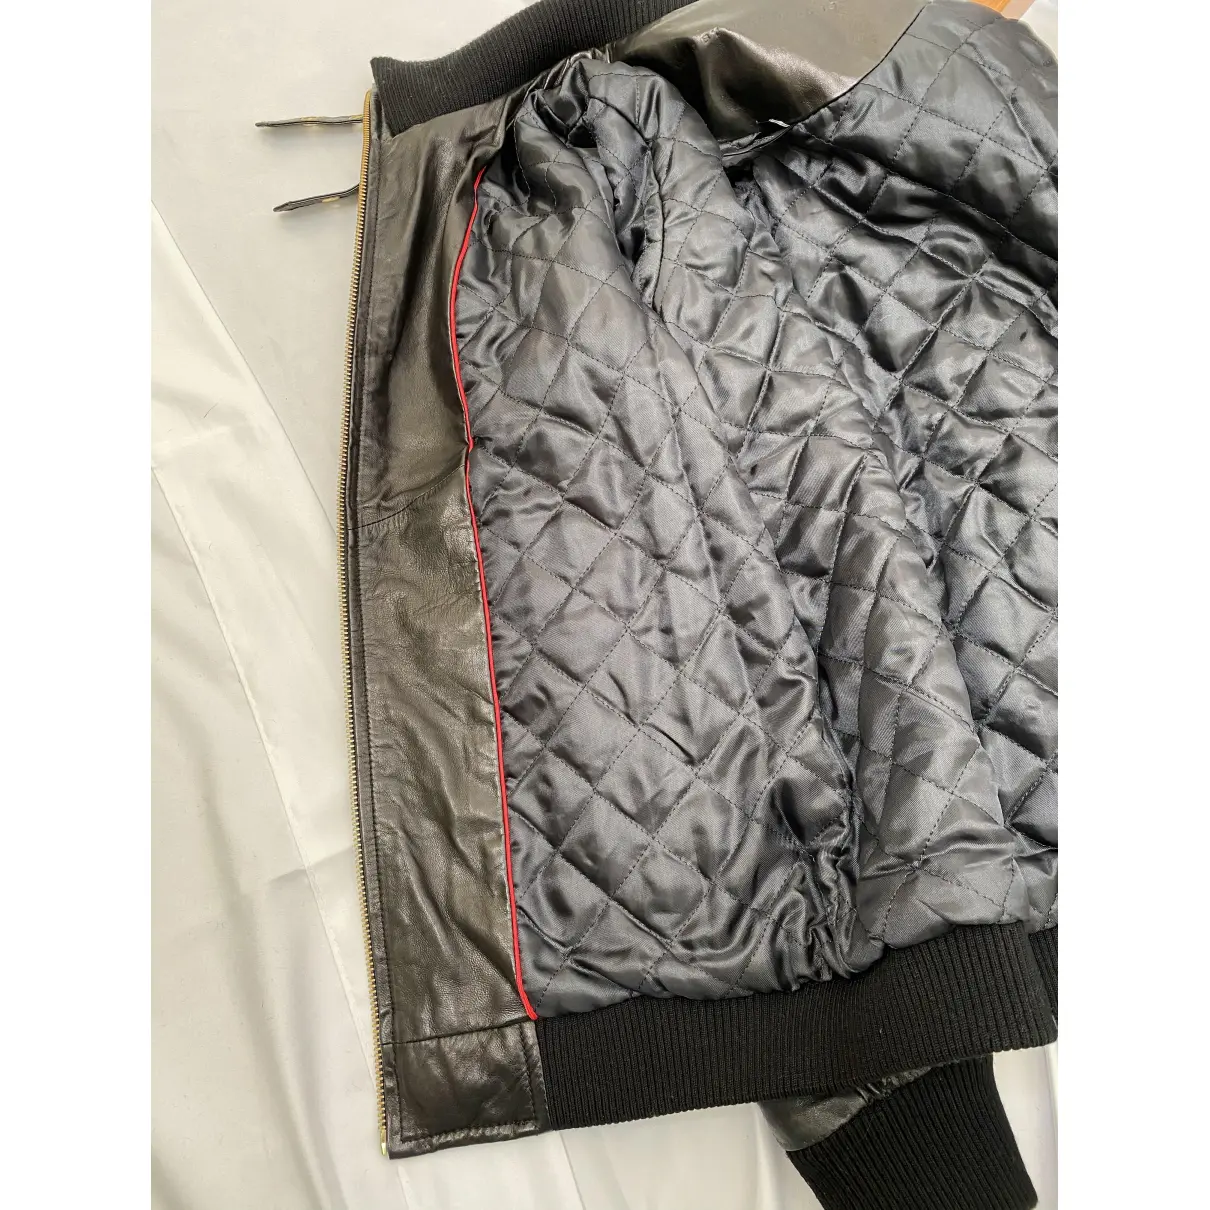 Buy Marc by Marc Jacobs Leather jacket online